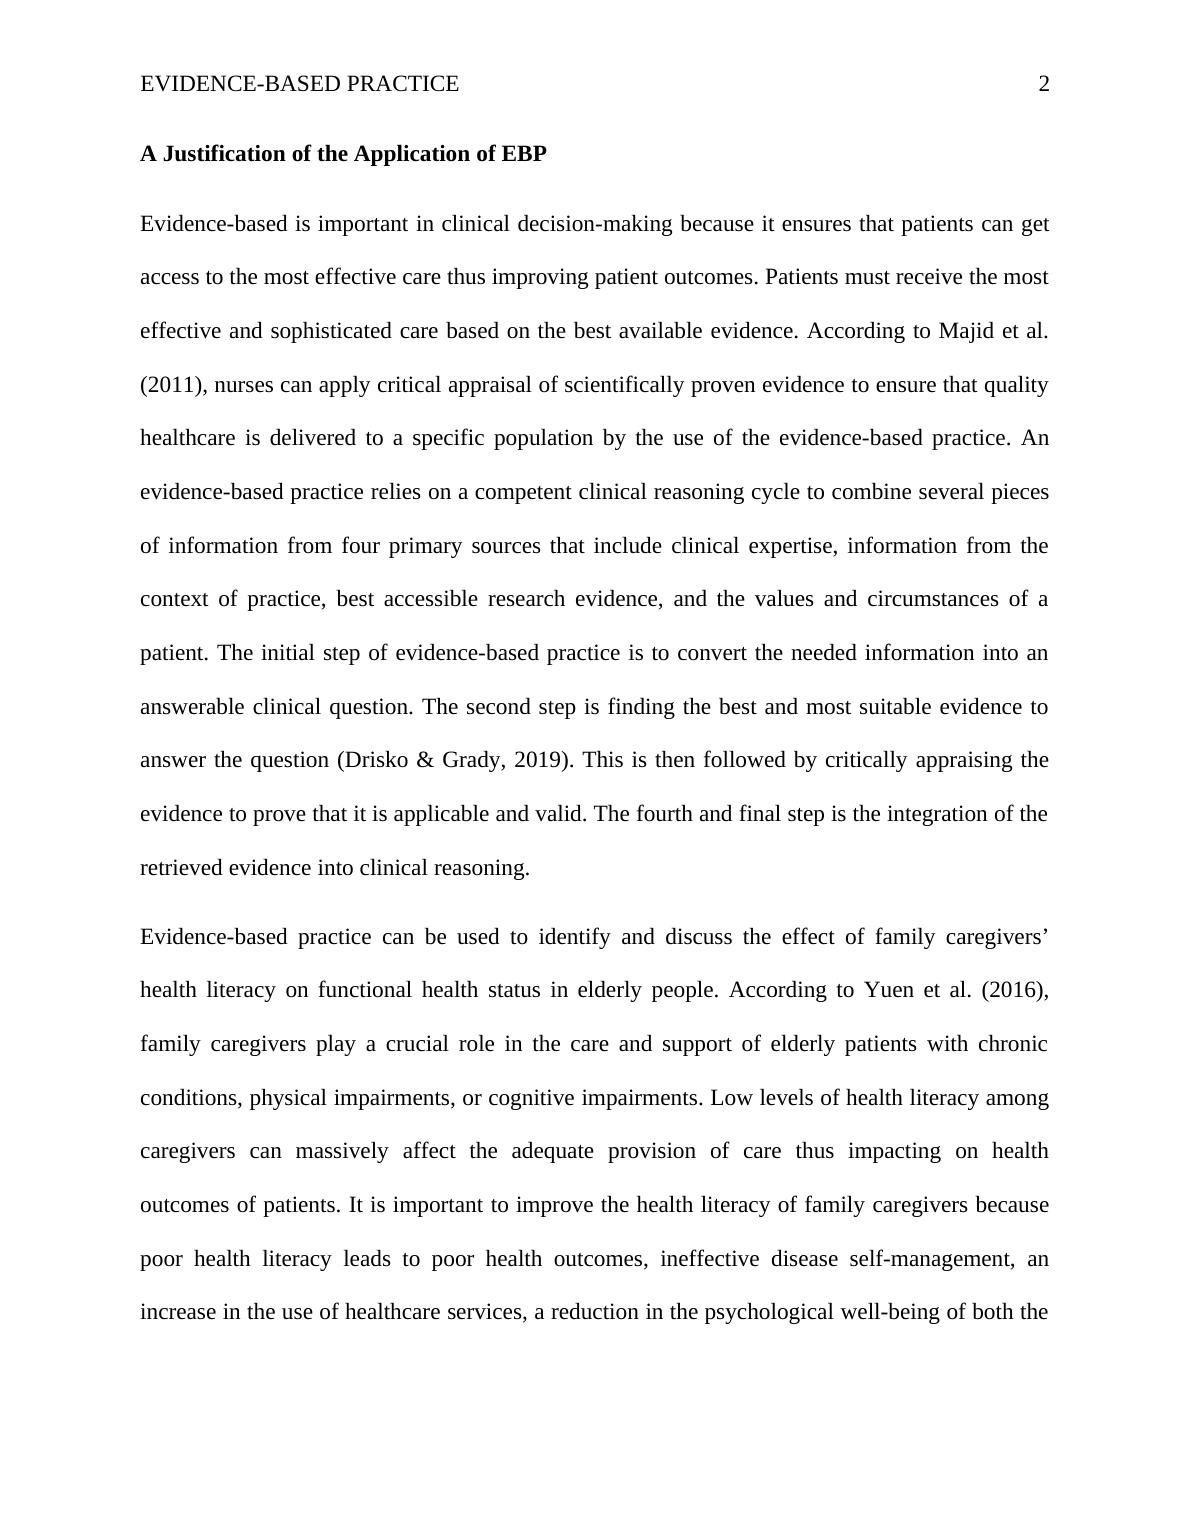 Health & Social Care In The Community Docx._2